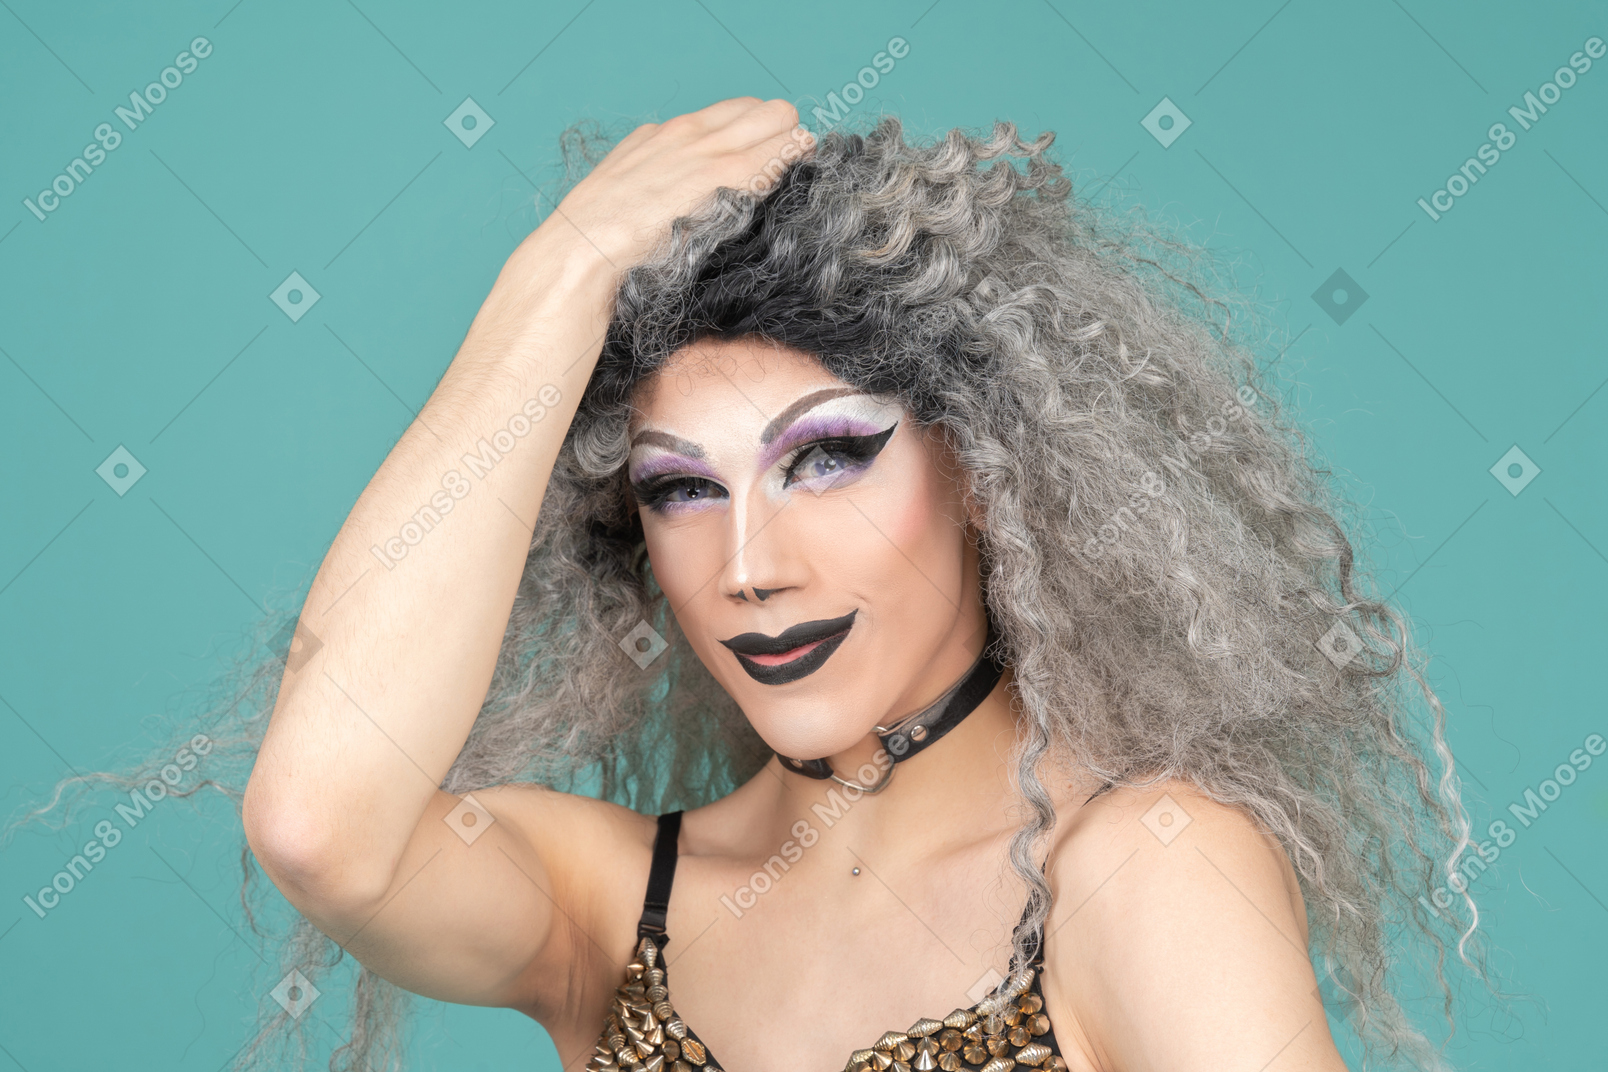 Headshot of a drag queen resting hand on top of head